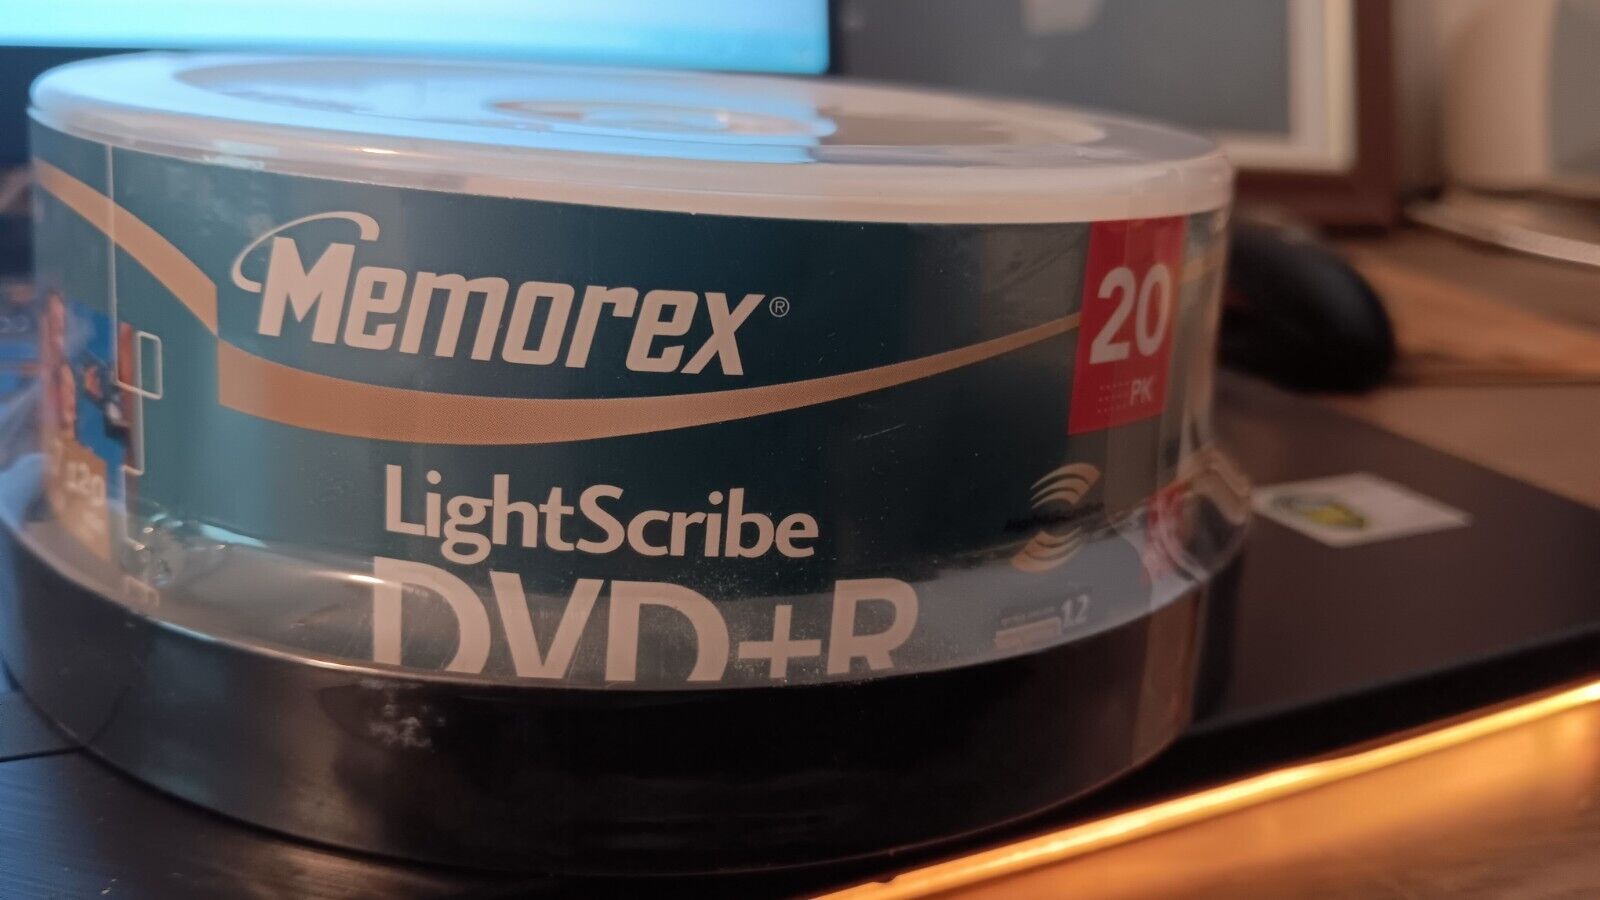 Memorex LightScribe DVD+R 20 Pack Spindle 16x/4.7GB /120 min Recordable (SEALED)